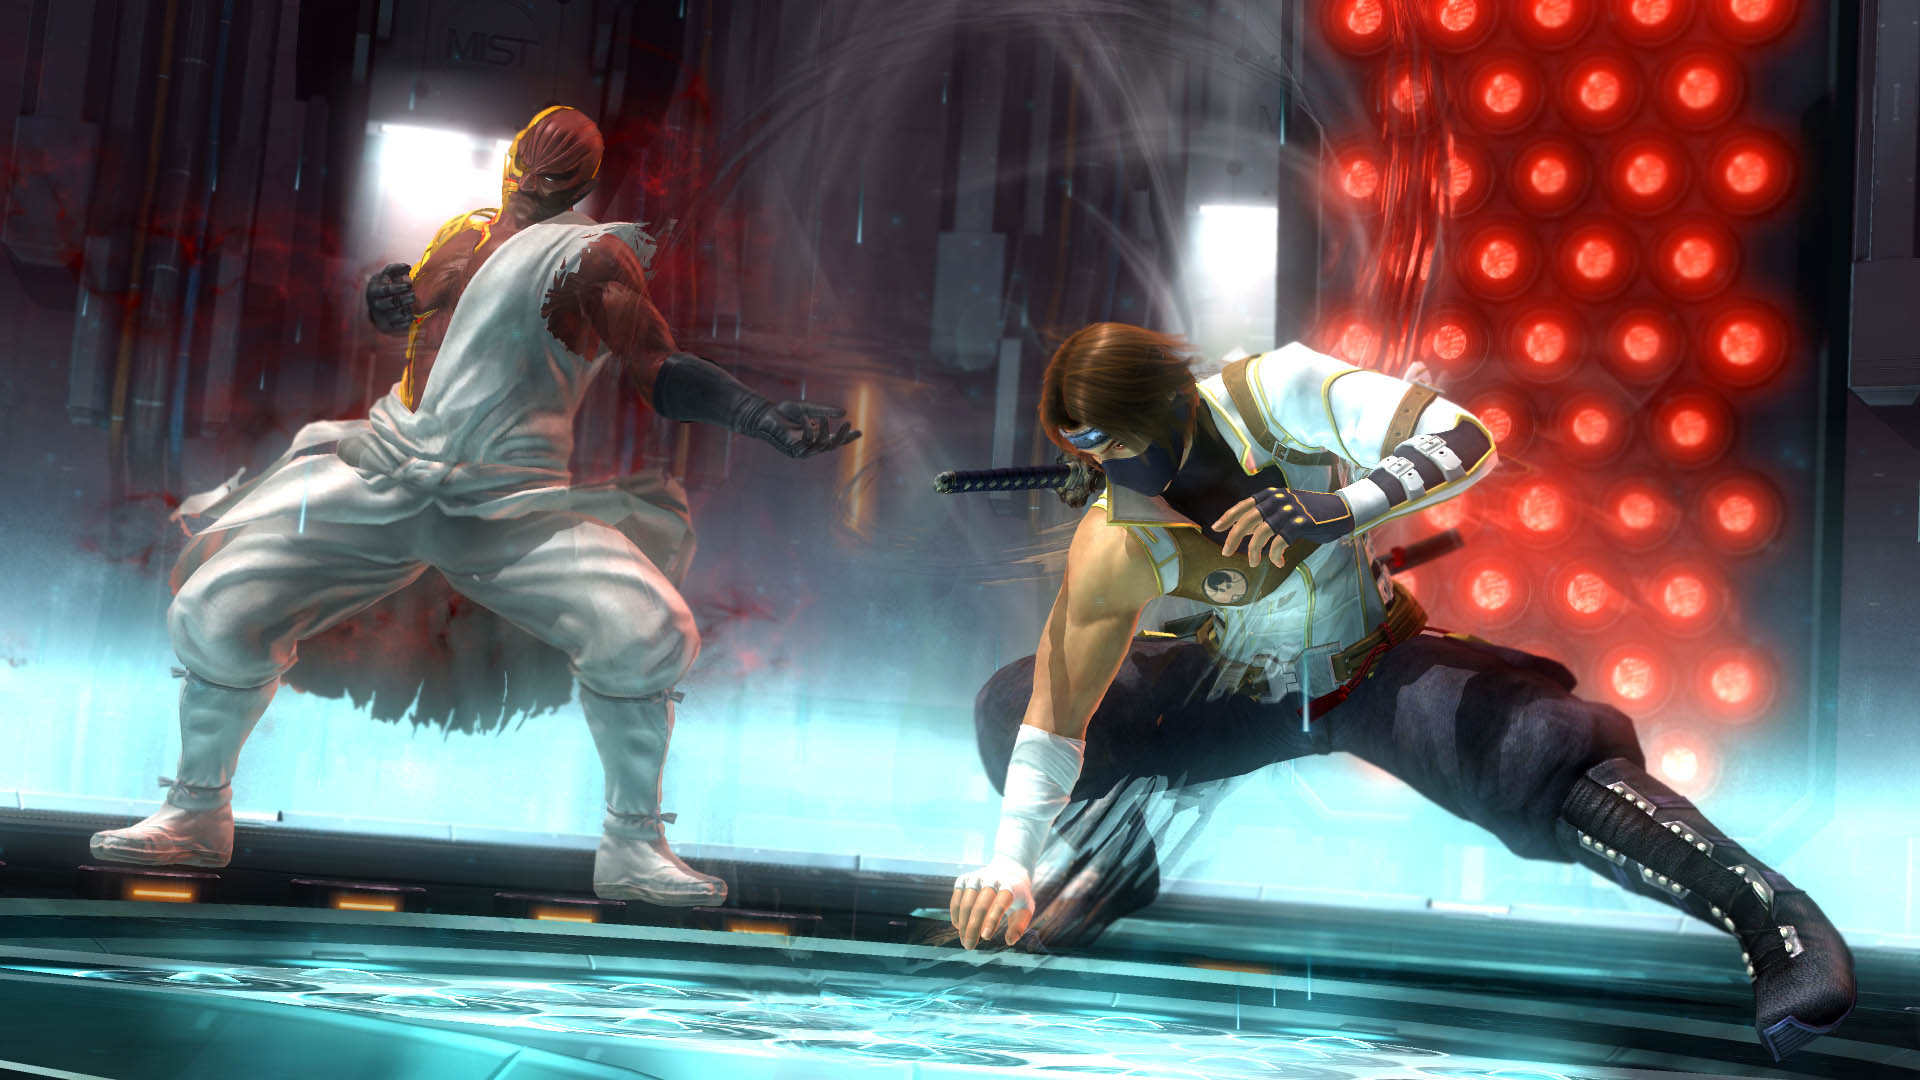 dead or alive 5 ps4 download free